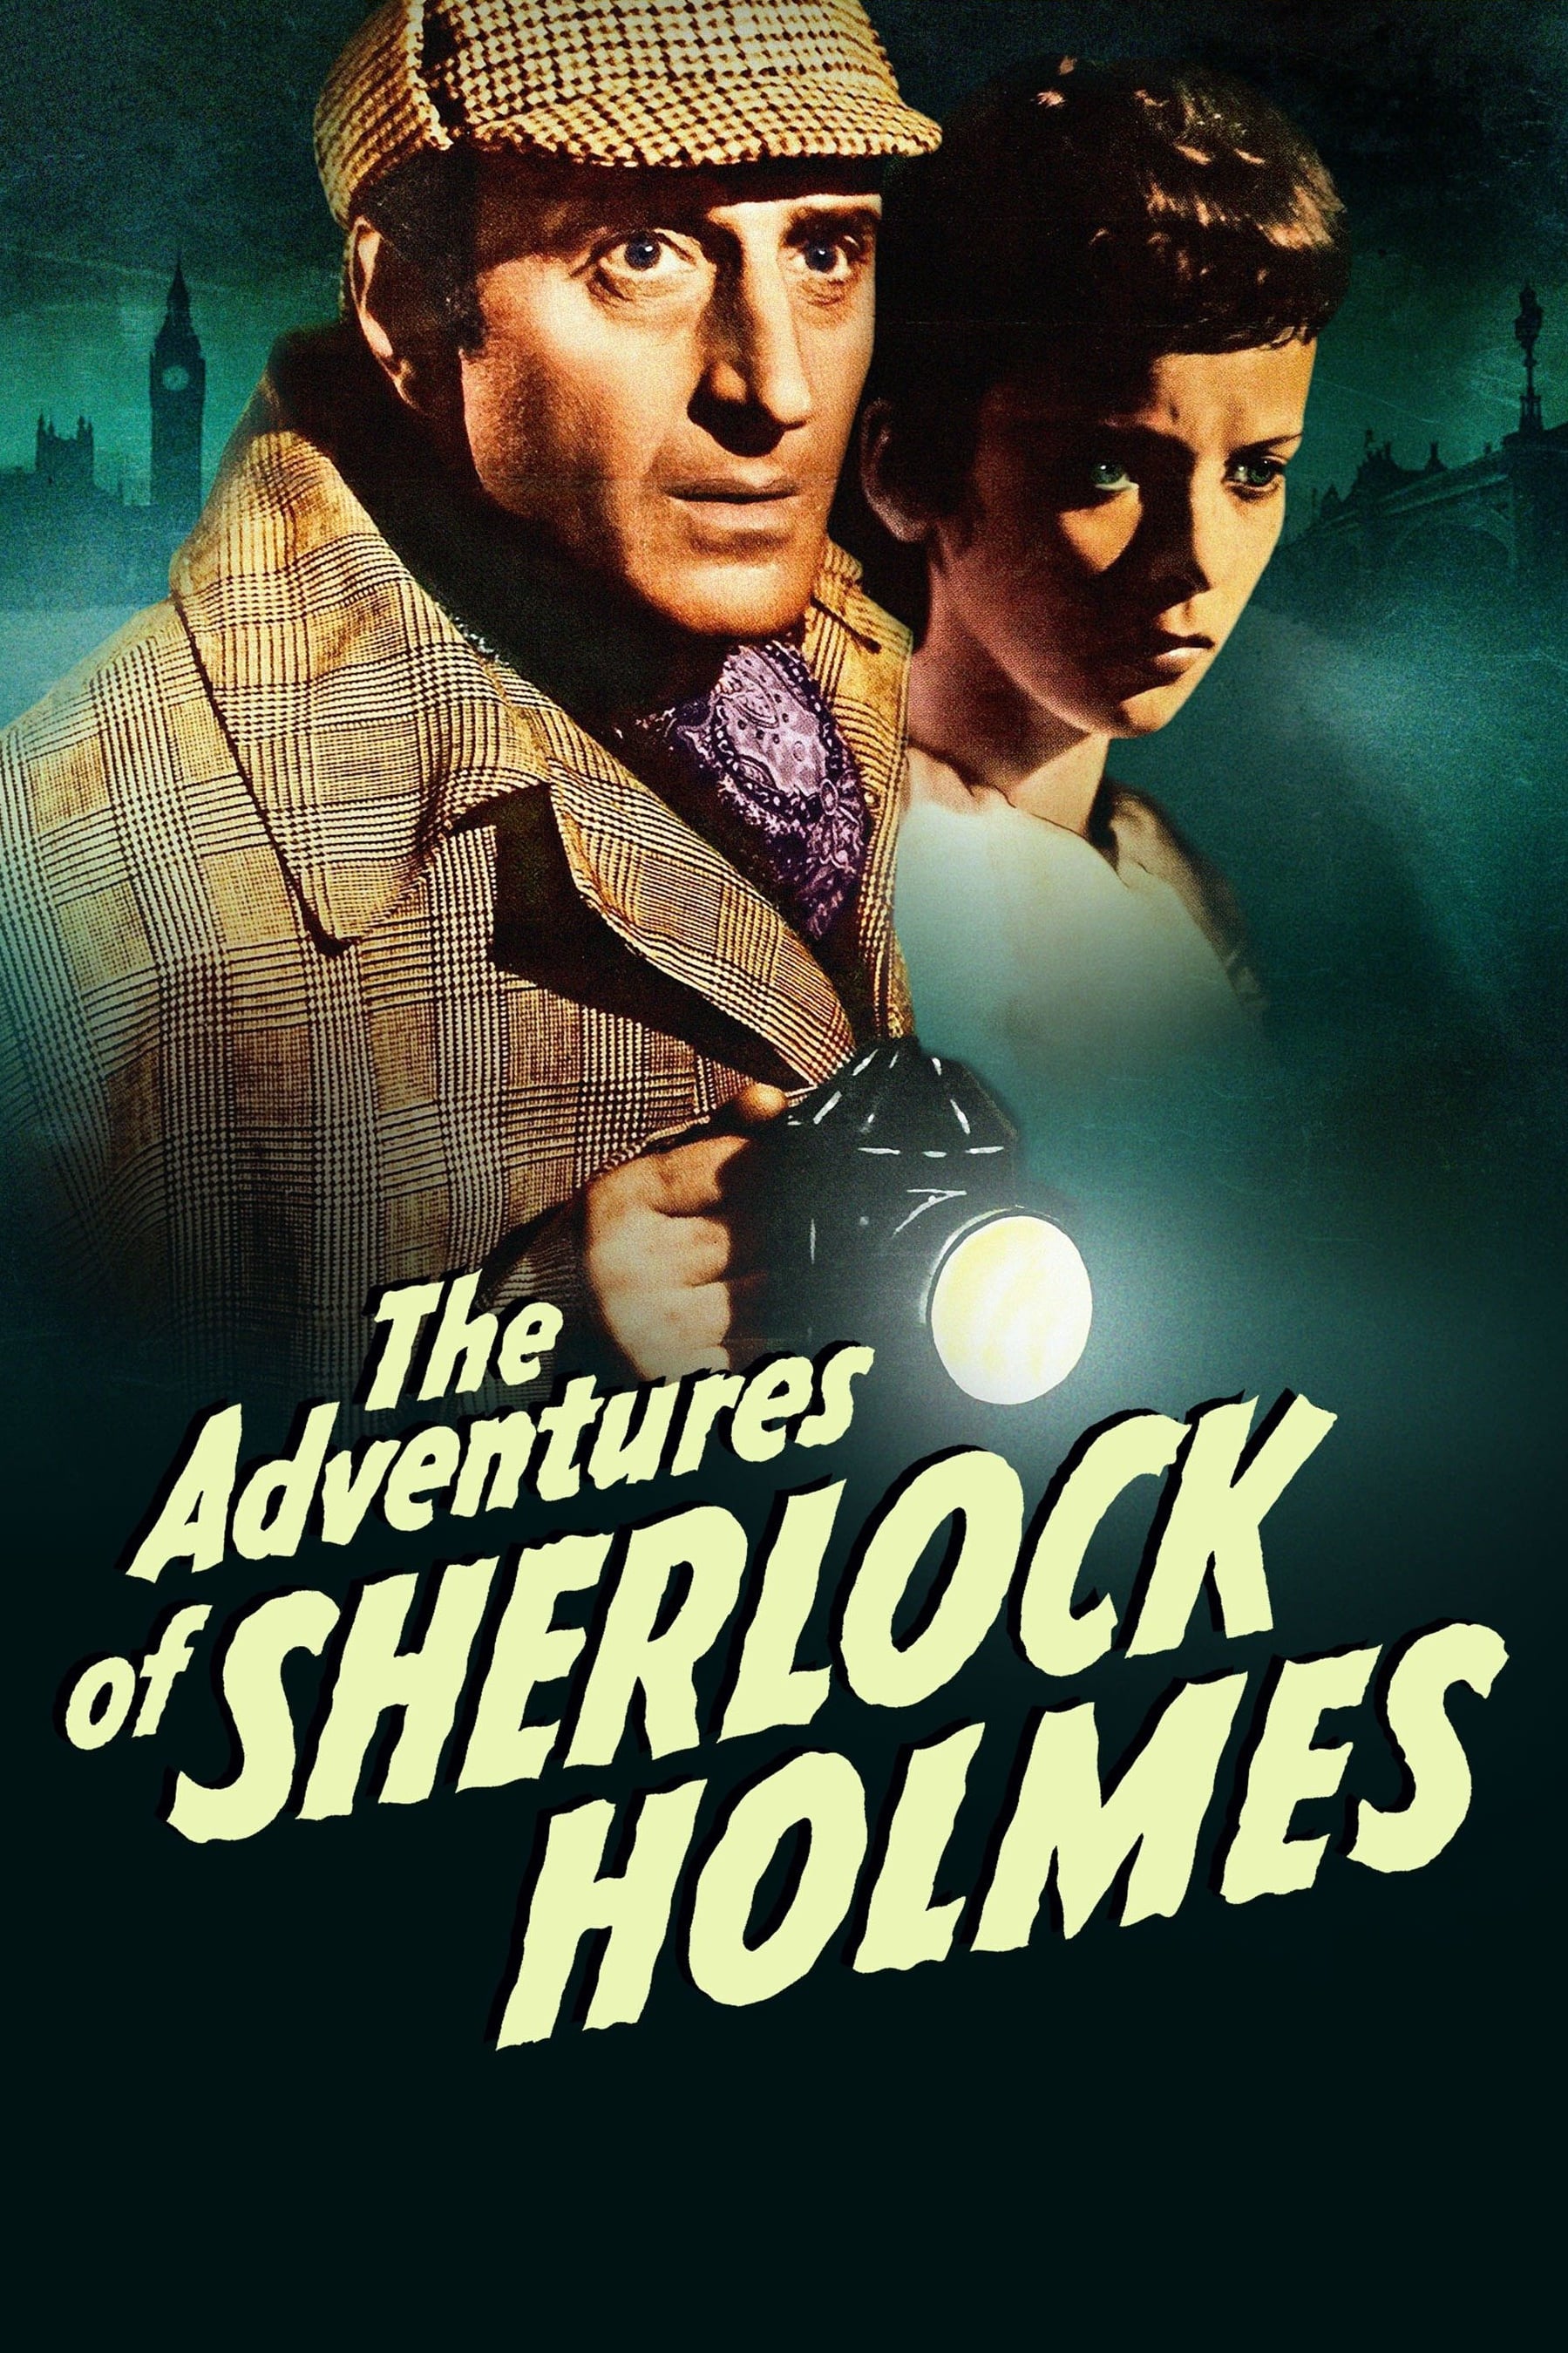 THE ADVENTURES OF SHERLOCK HOLMES MOVIE POSTER 1939 